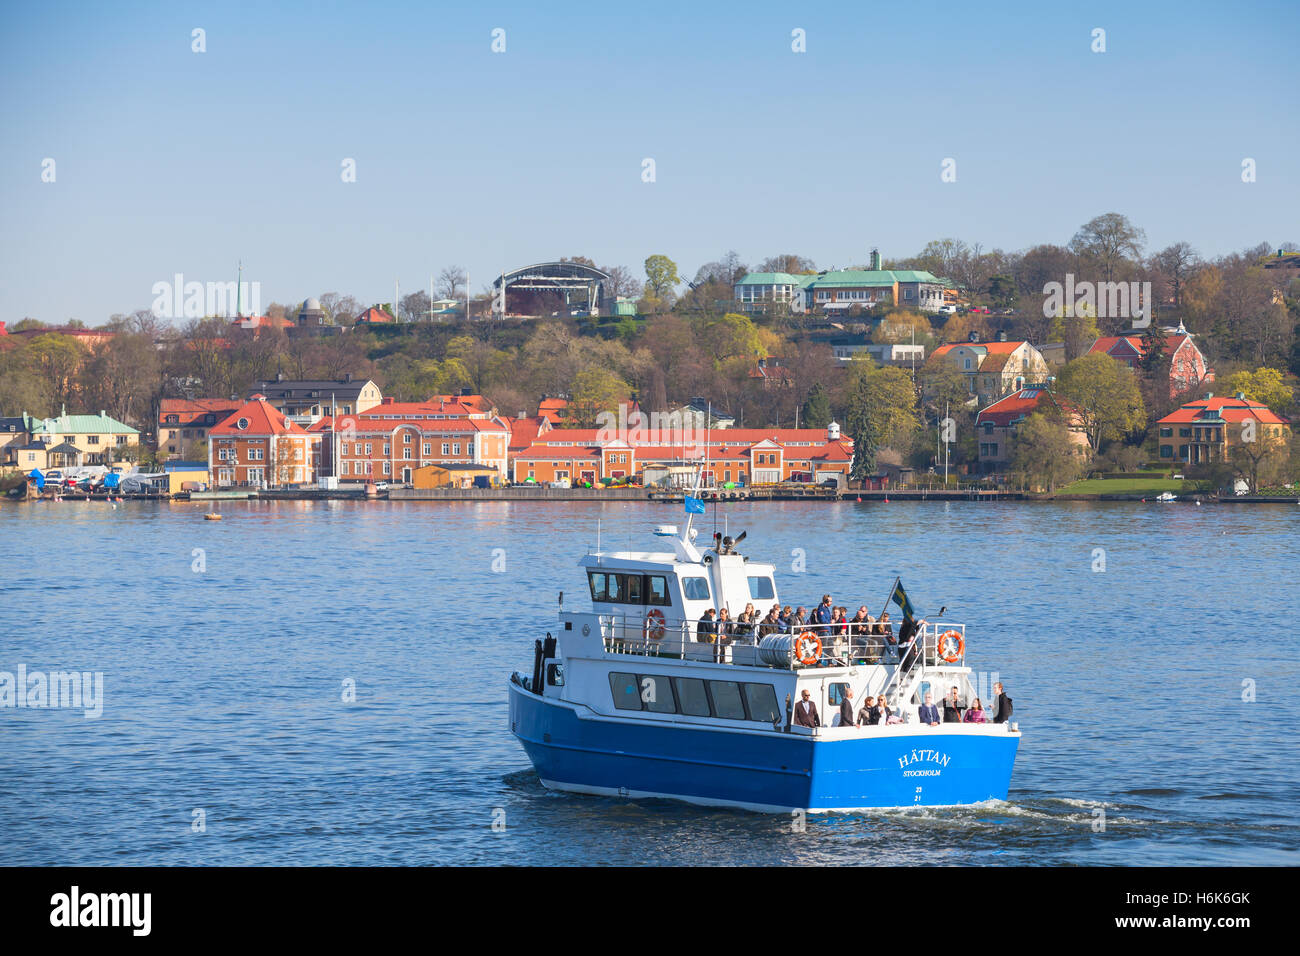 Stockholm, Sweden - May 4, 2016: Small blue passenger ferry with ordinary people on board, regular public transportation Stock Photo